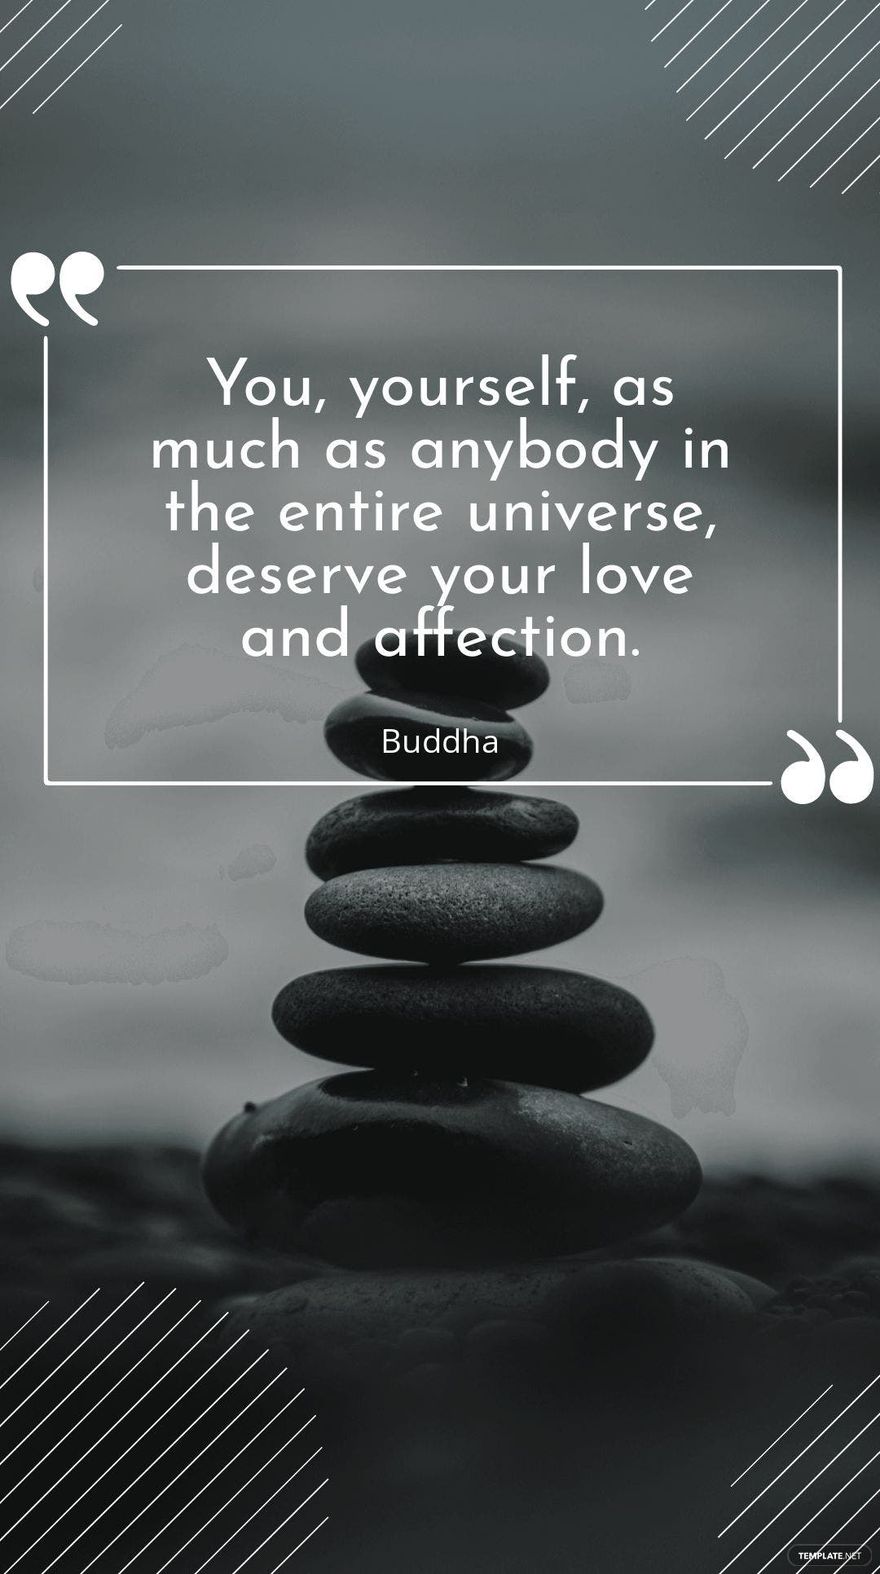 Buddha - “You, yourself, as much as anybody in the entire universe, deserve your love and affection.” 